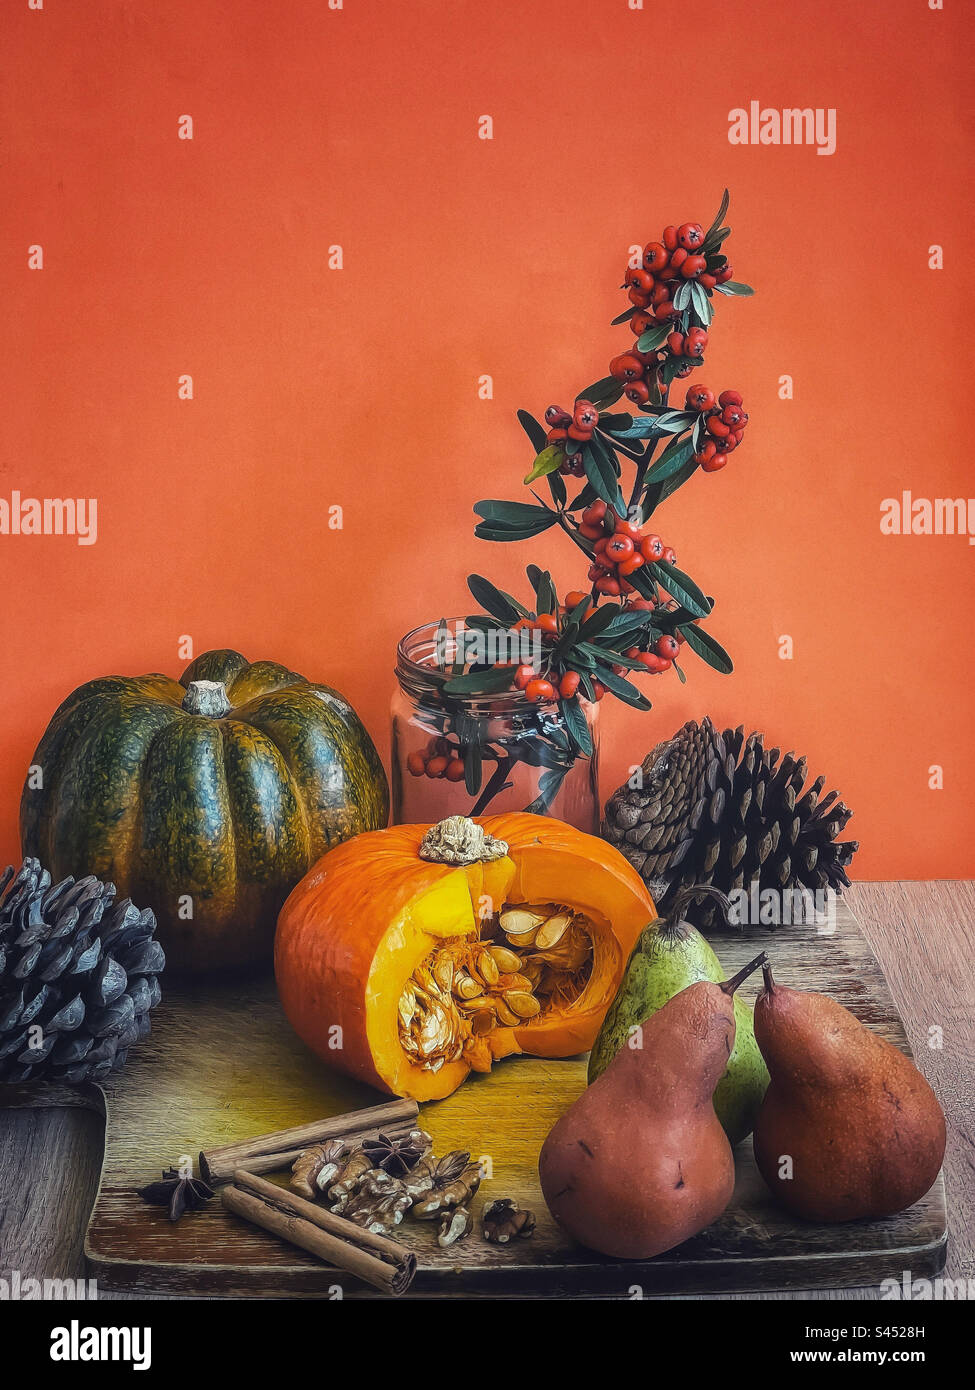 Still life of arrangement of pumpkins, pine cones, pears, walnuts, spices and orange Cotoneaster berry branches against orange background. Autumn. Thanksgiving. Celebration. Stock Photo